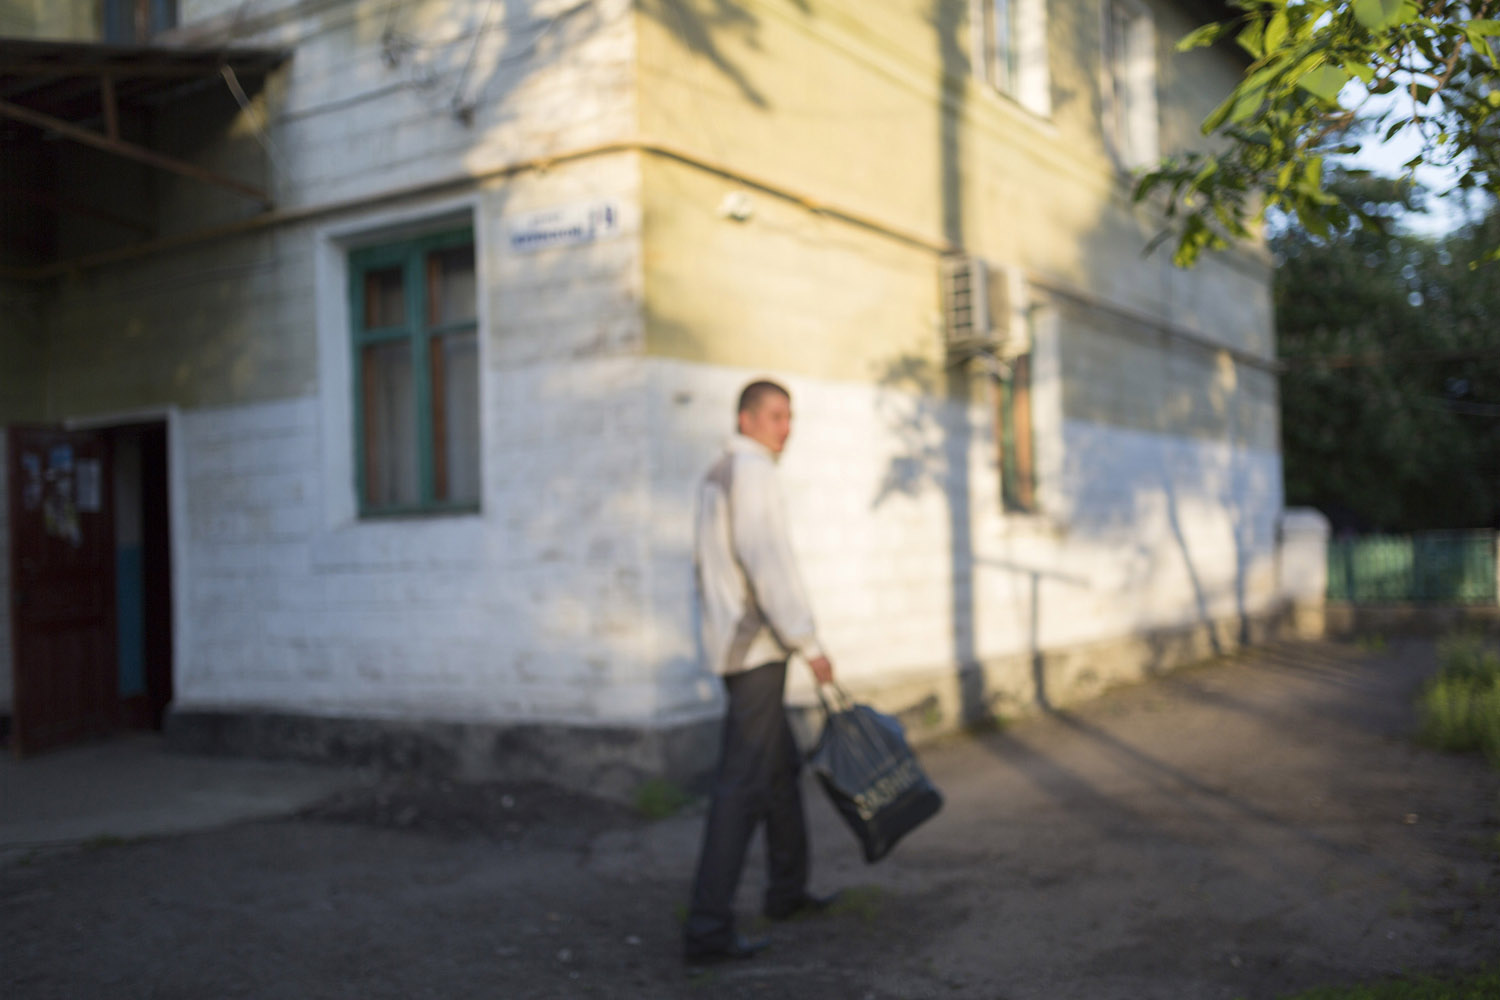 Ivan (29), going to work in Shakhtiorsk at 5:30 in the morning, after drinking a couple of beers. He is married, a few weeks ago had his first child and often jokes on how every day, when he goes to work, he does not know if he will come back alive. When asked if he's afraid, he laughs – “you don't ask this question to a Russian”.